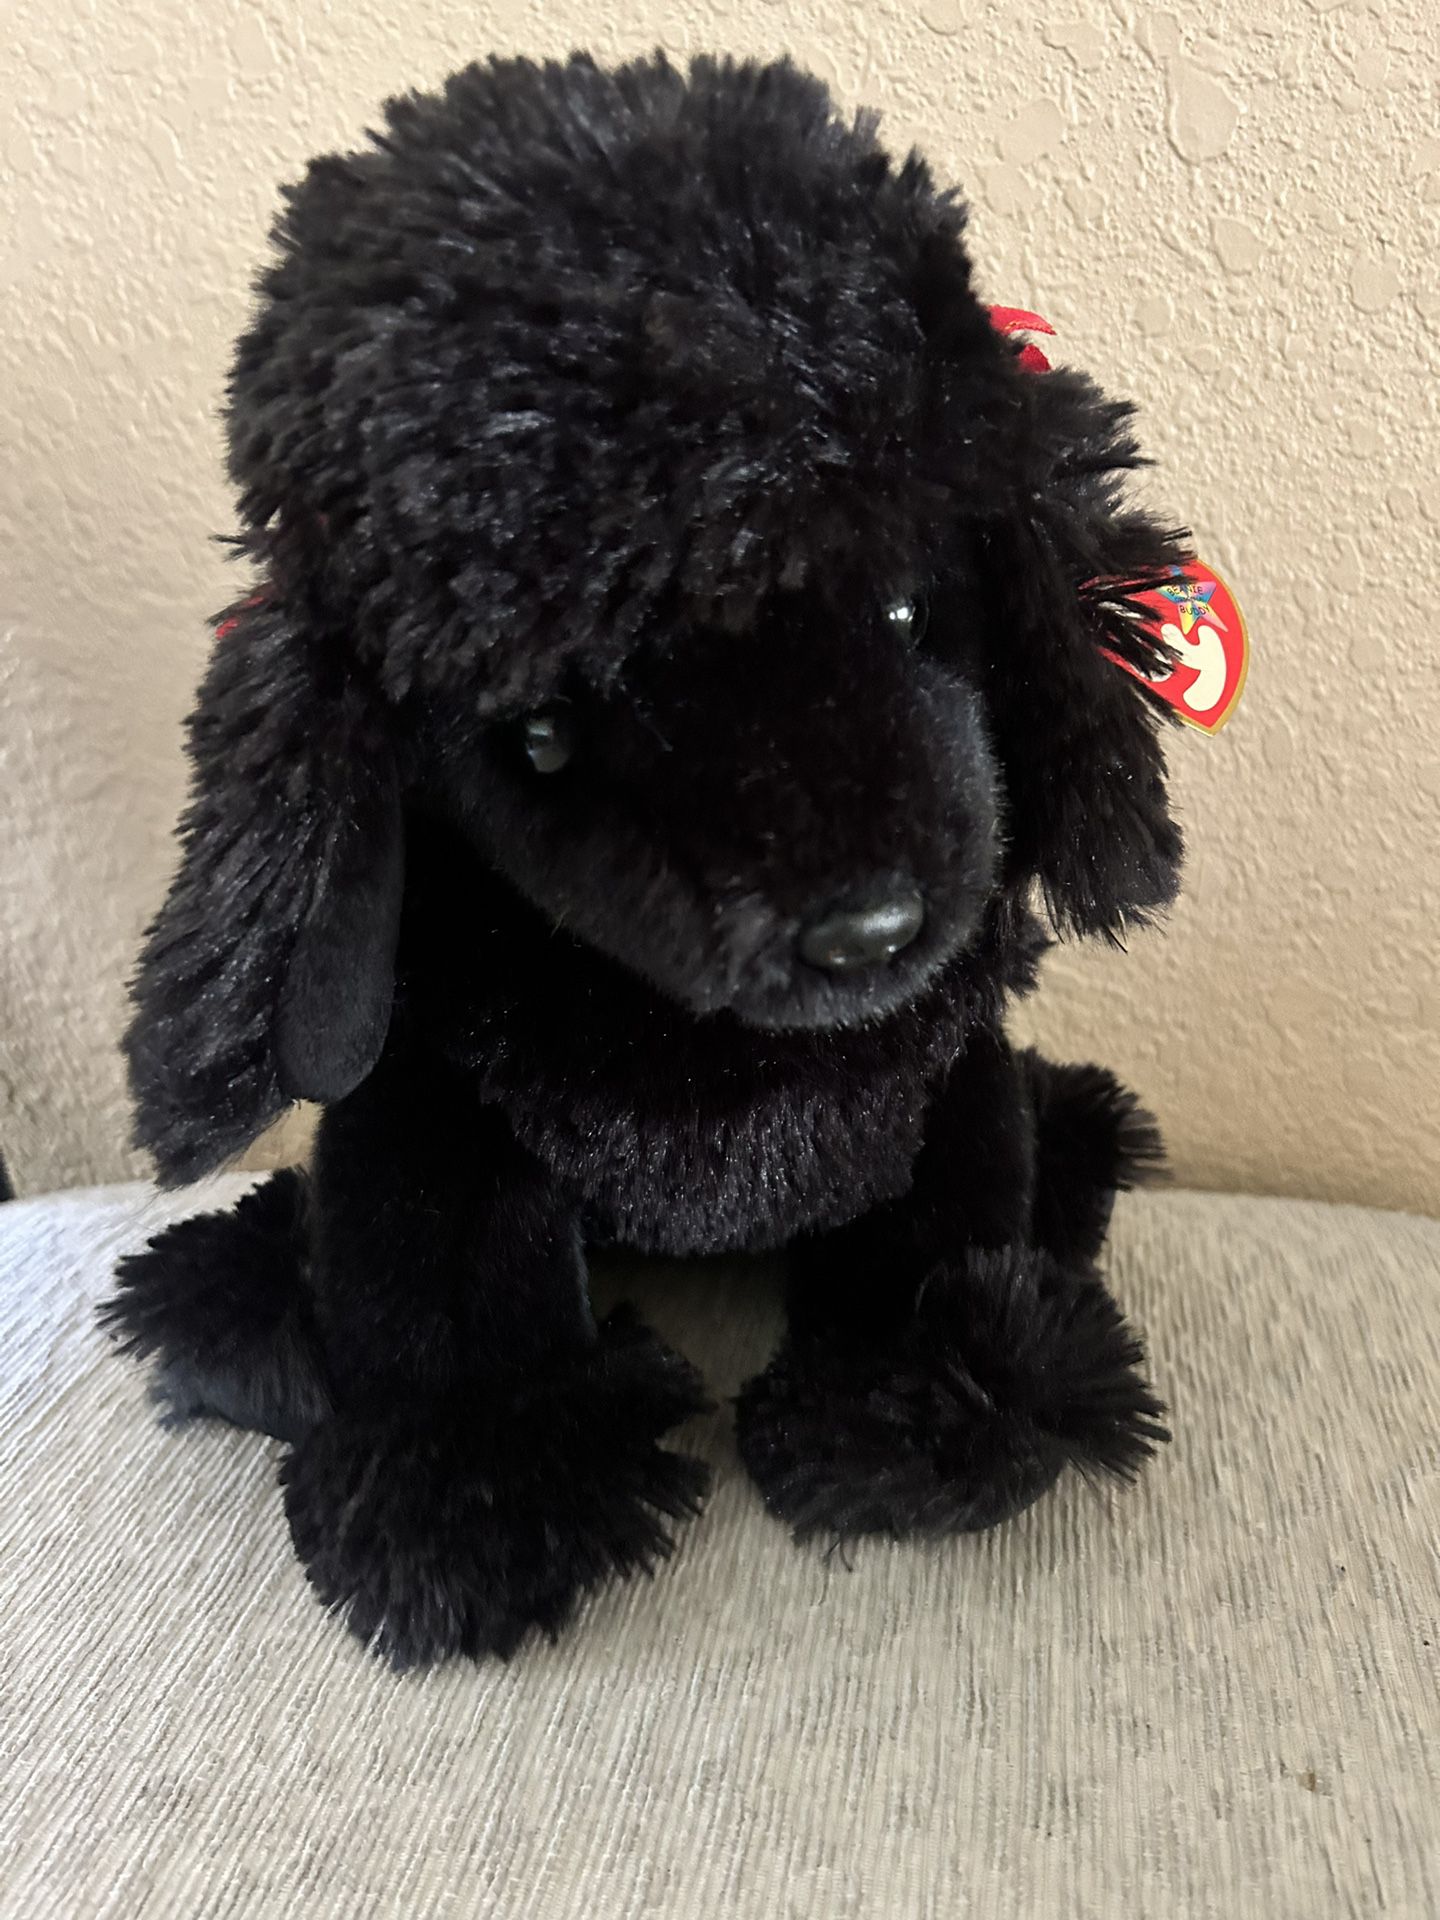 The Beanie Buddies Collection (Gigi) Ty Beanie Babies Poodle - Vintage